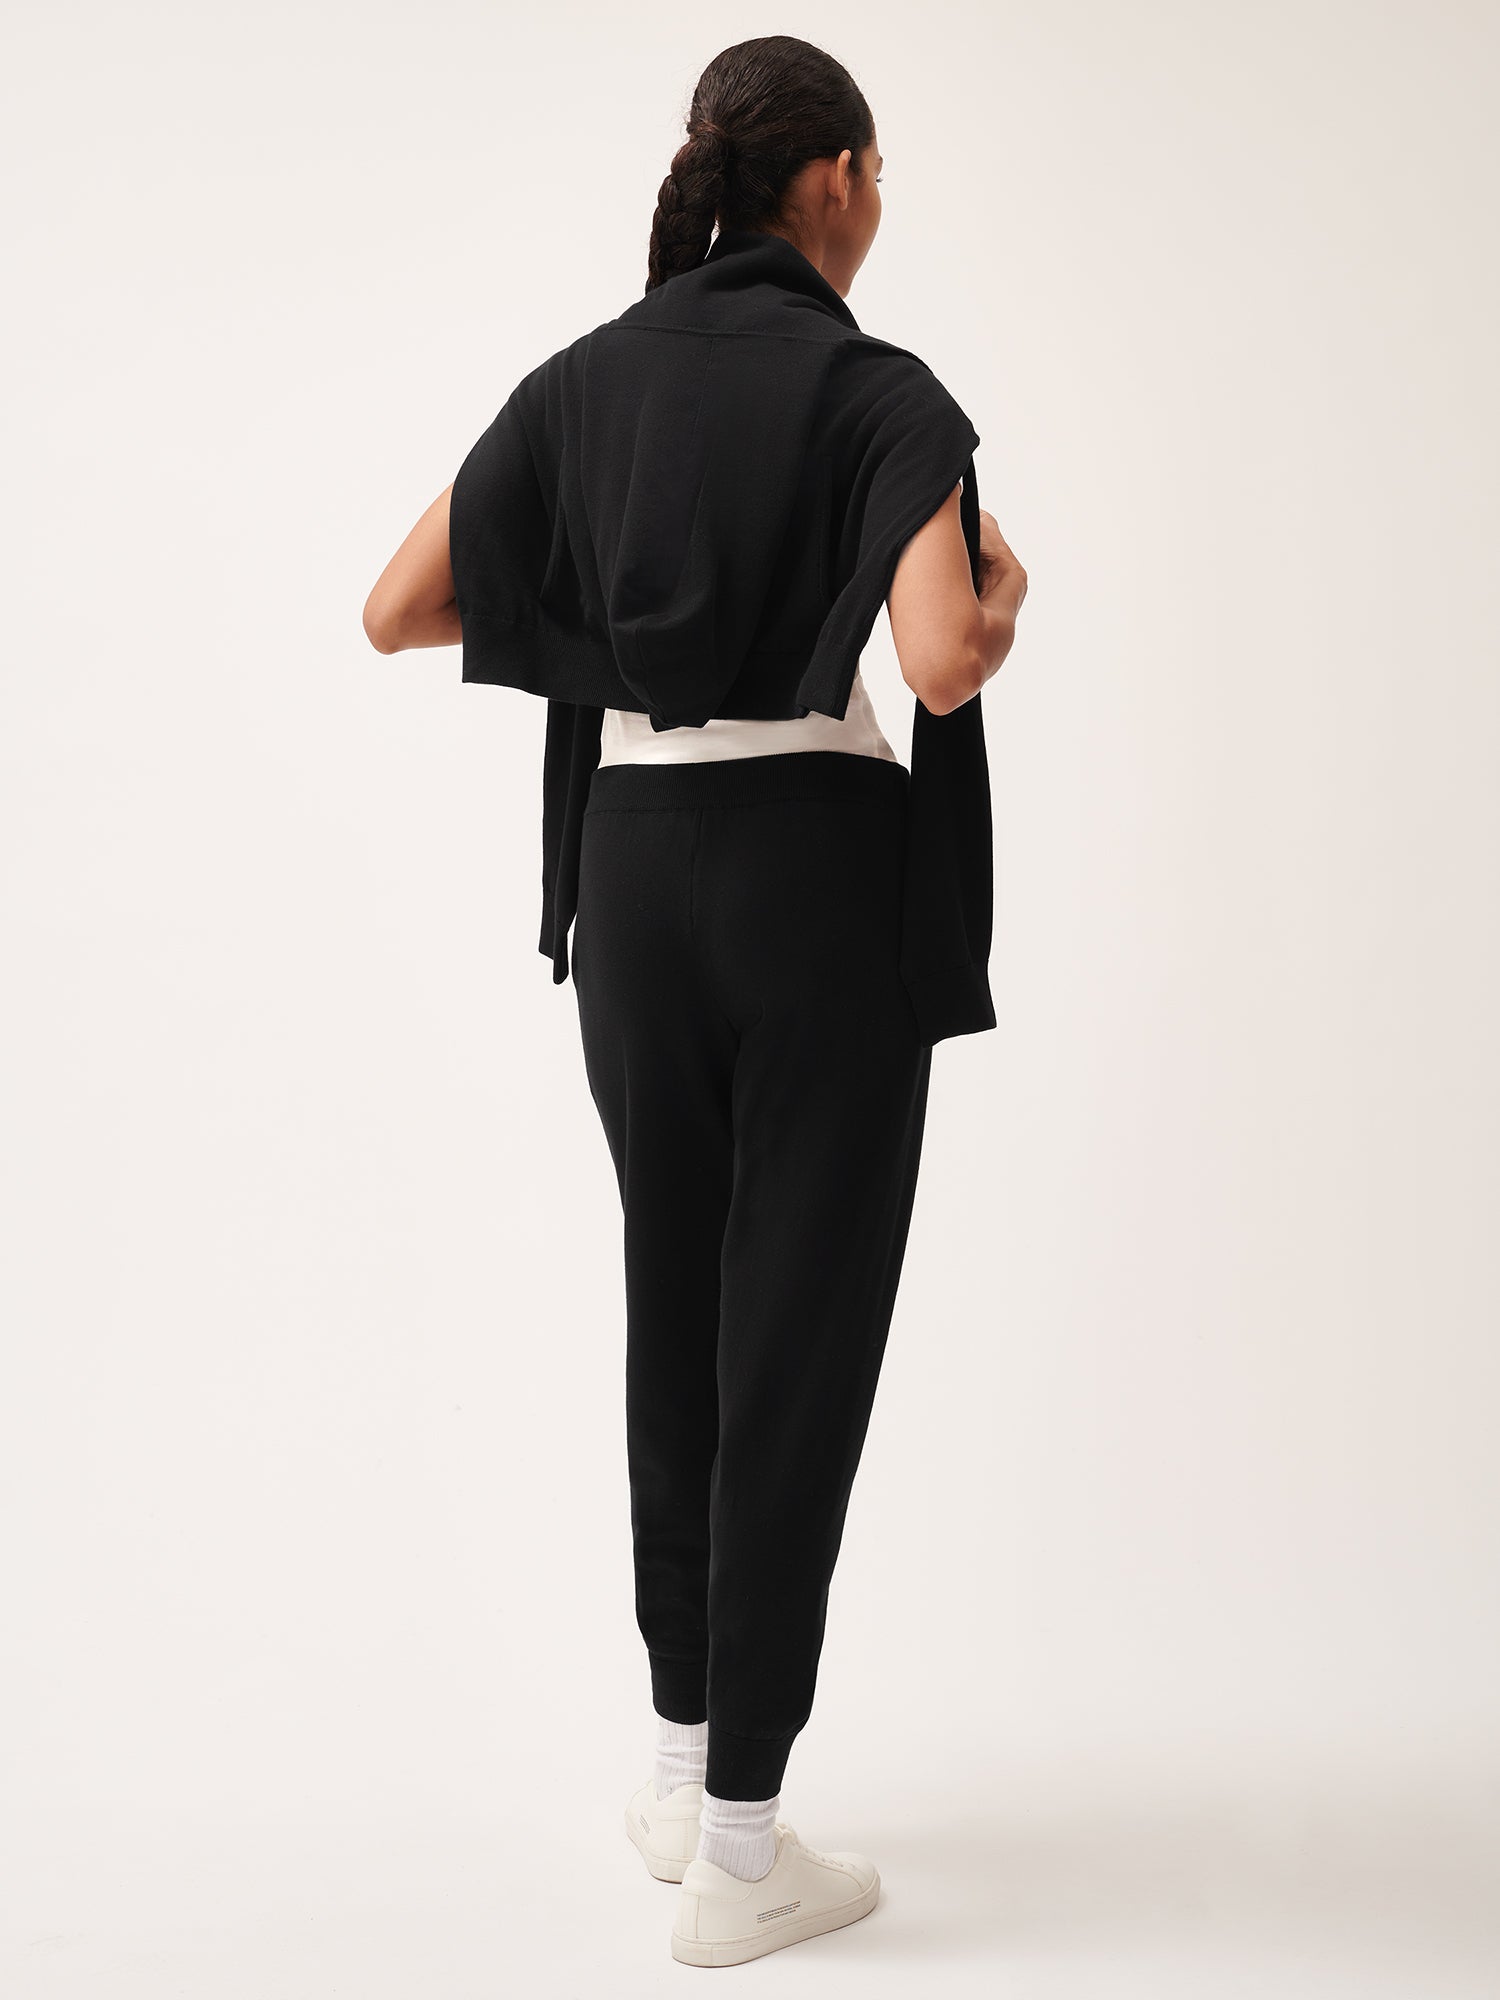 DNA_Knitted_Track_Pants_Black_female-2